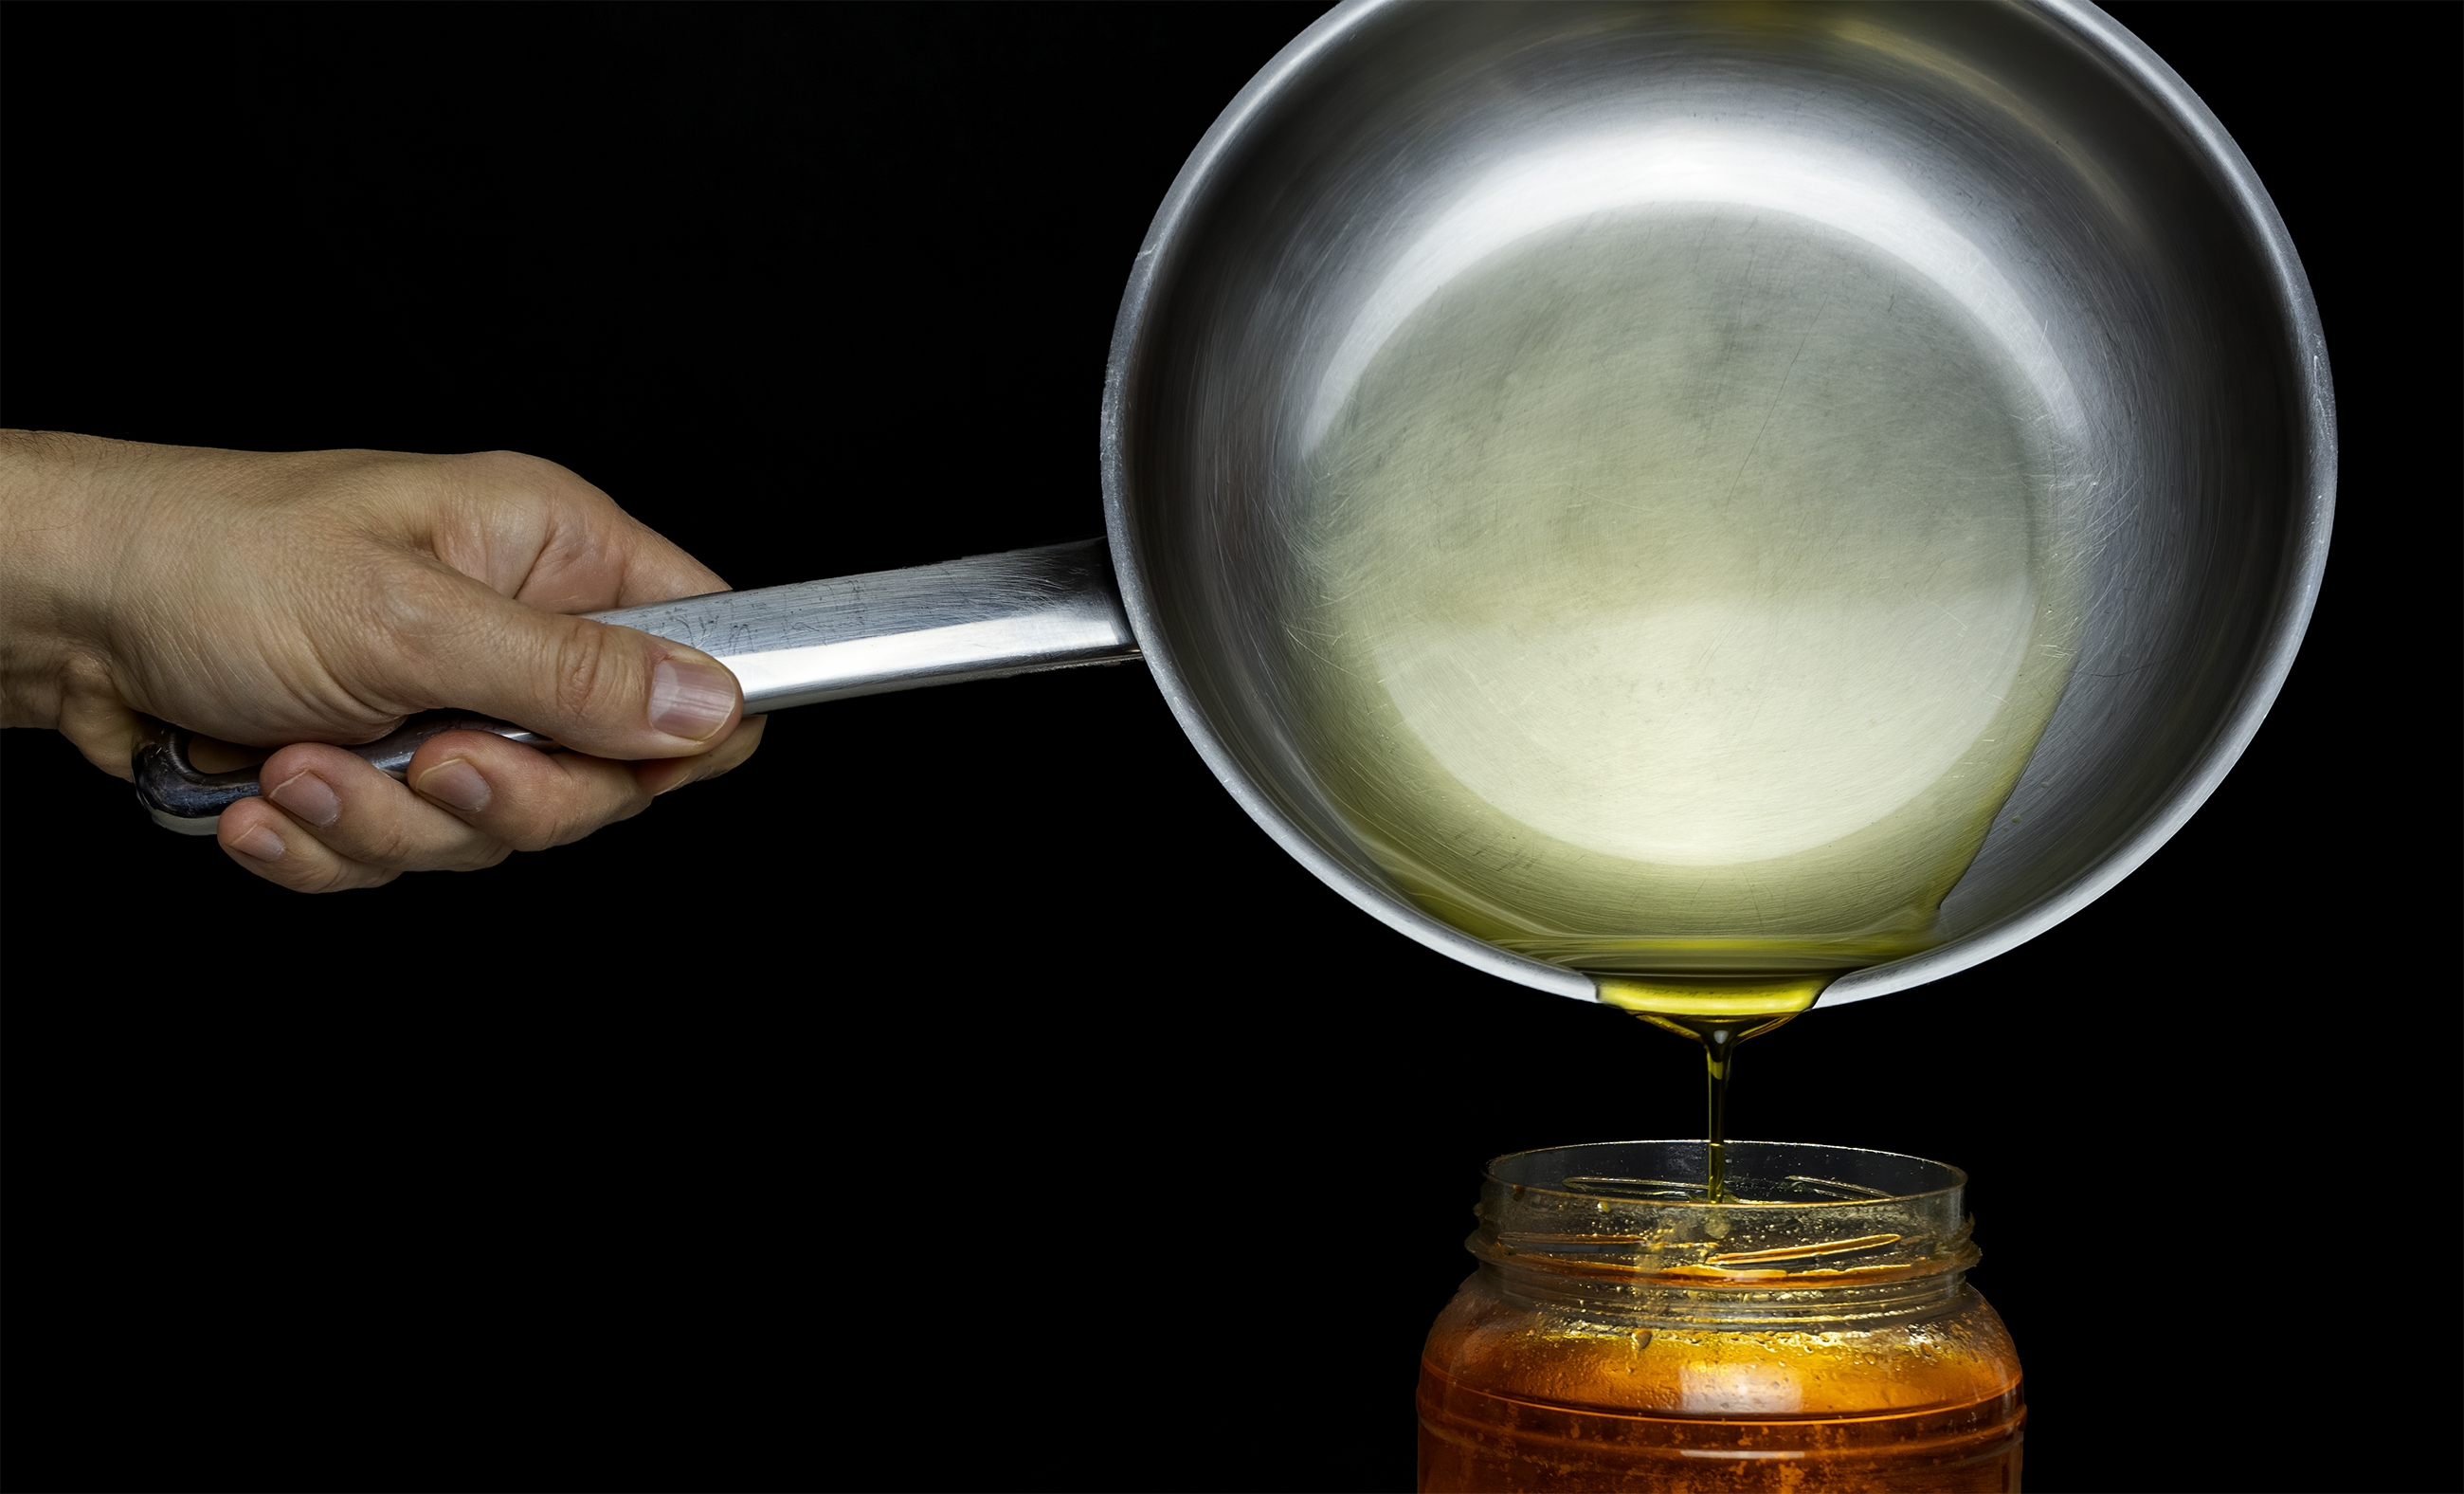 How to Responsibly Dispose of Grease From Cooking